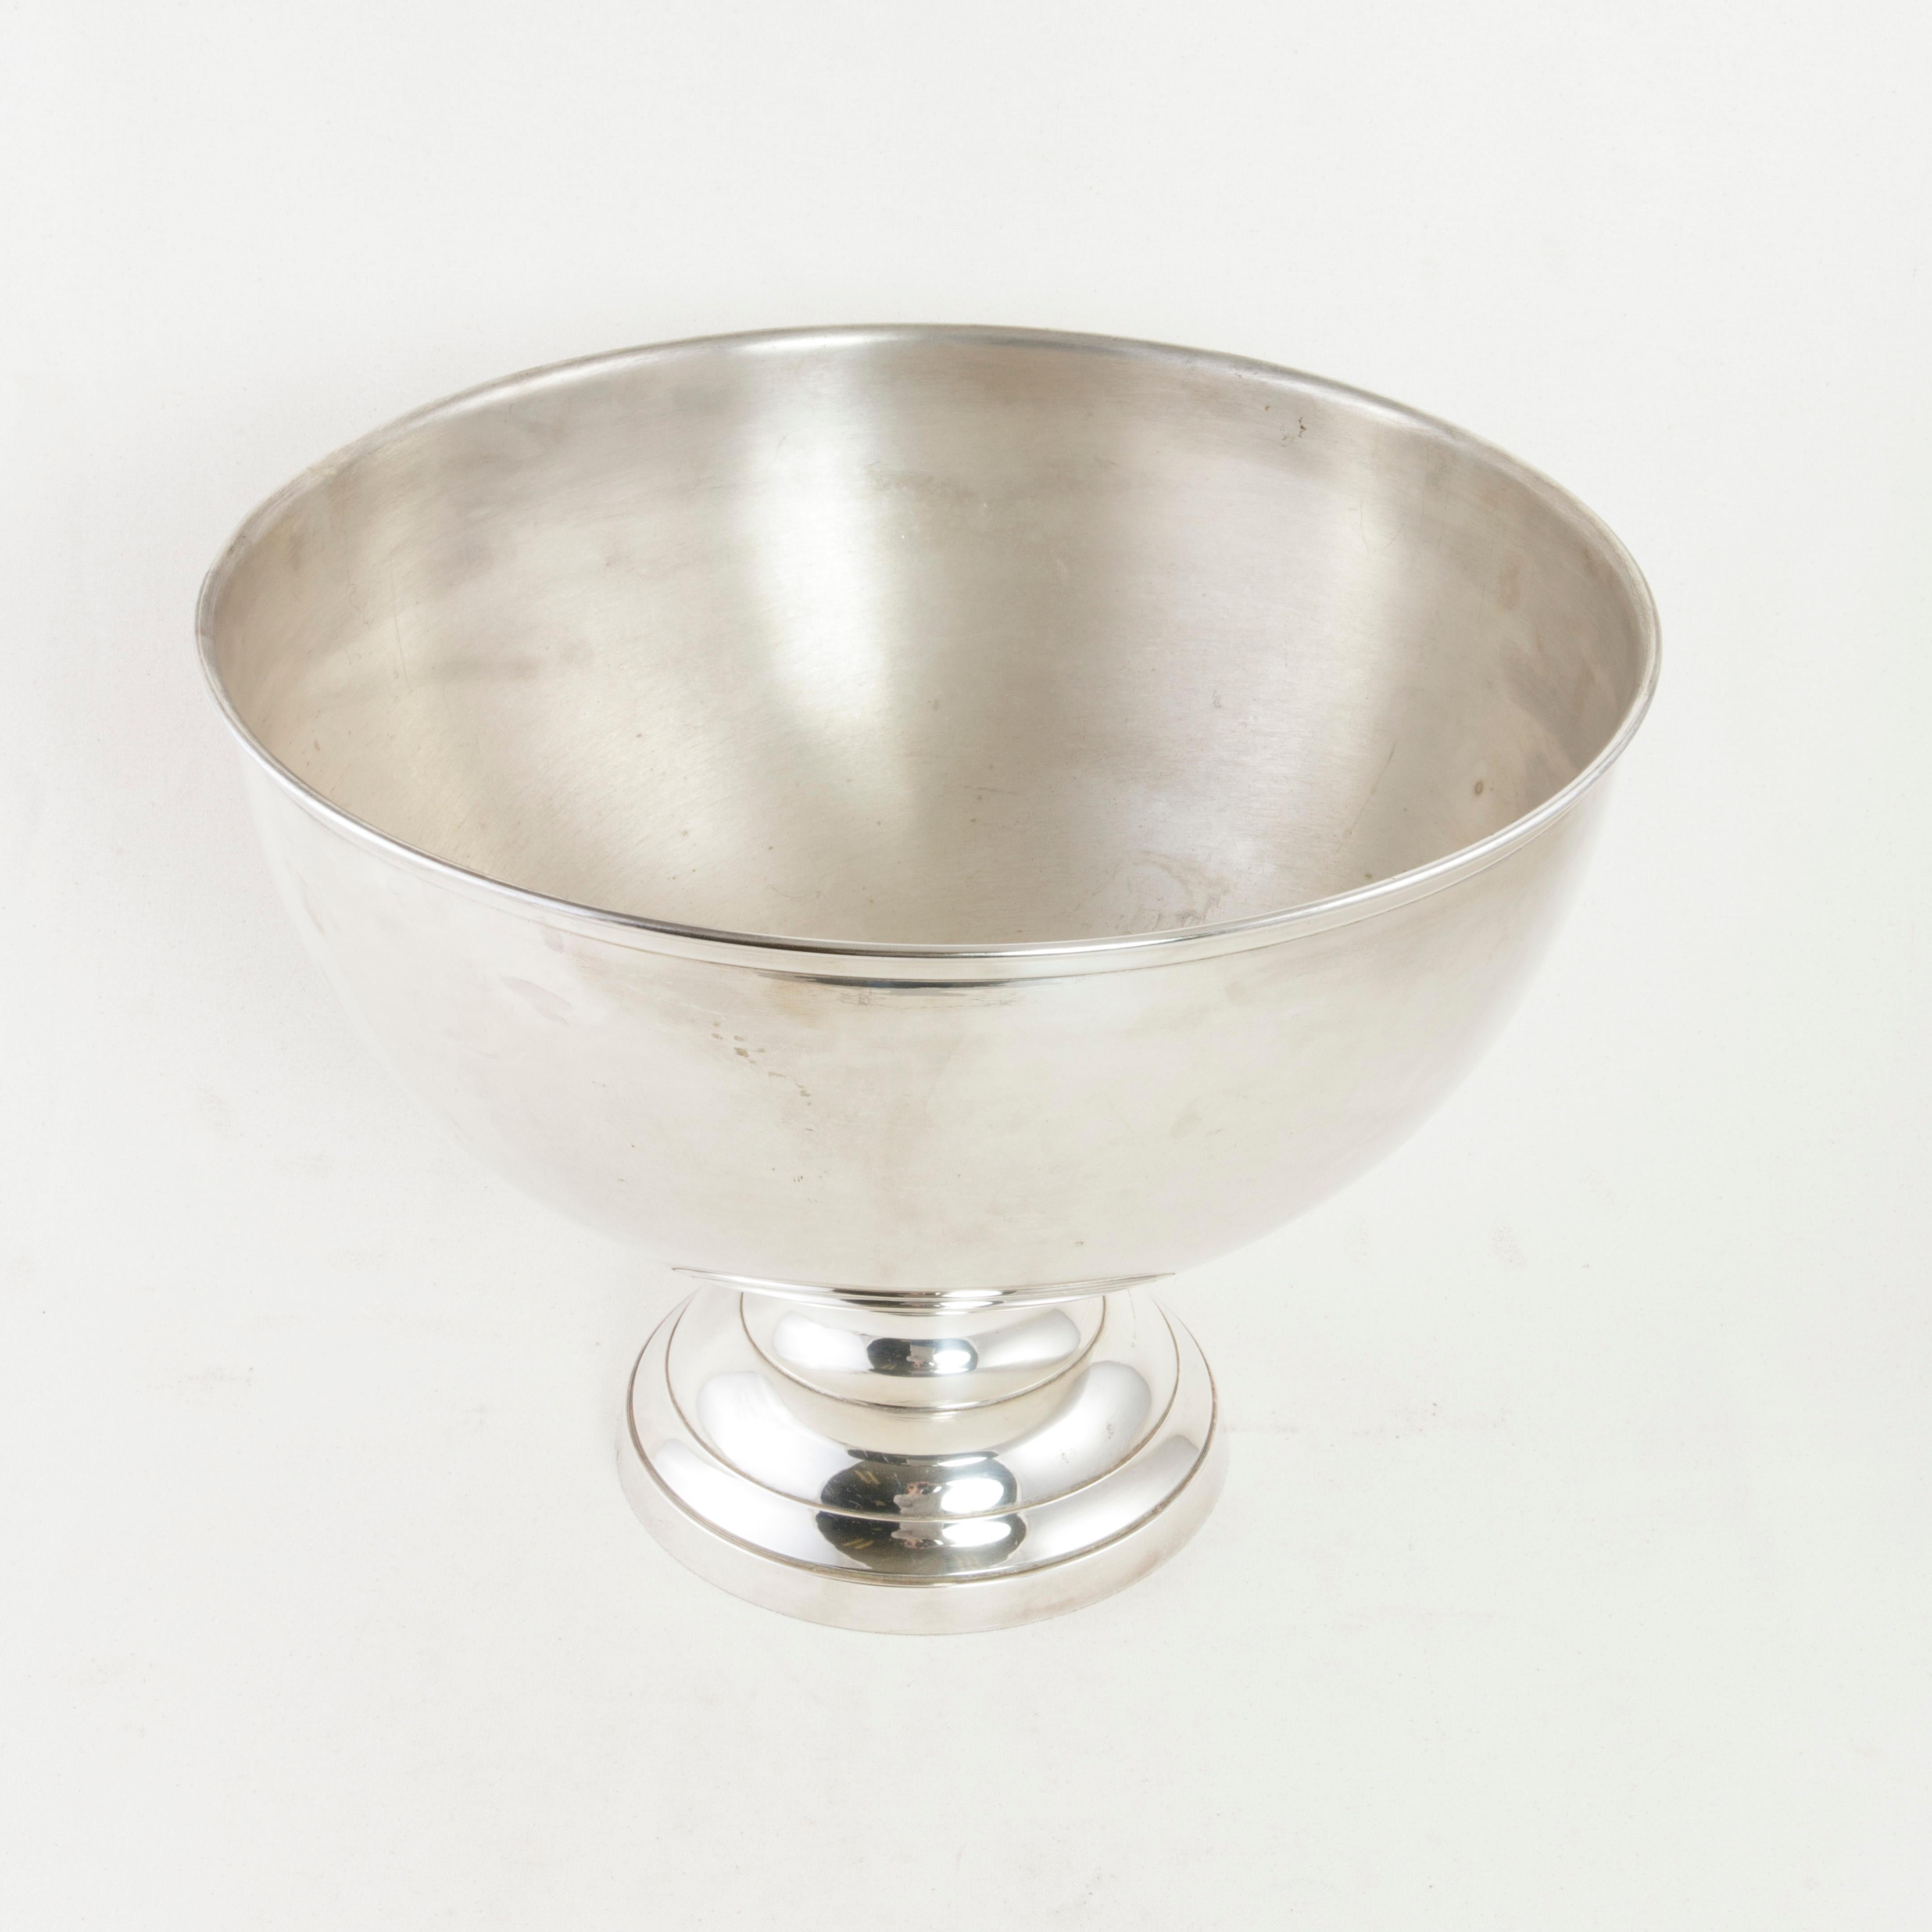 This midcentury French silver plate hotel champagne bucket features a 15.5 inch diameter bowl that rests on a footed base. The base is stamped with the silver plate hallmark. A removable insert with twelve points rests on the rim and is used to